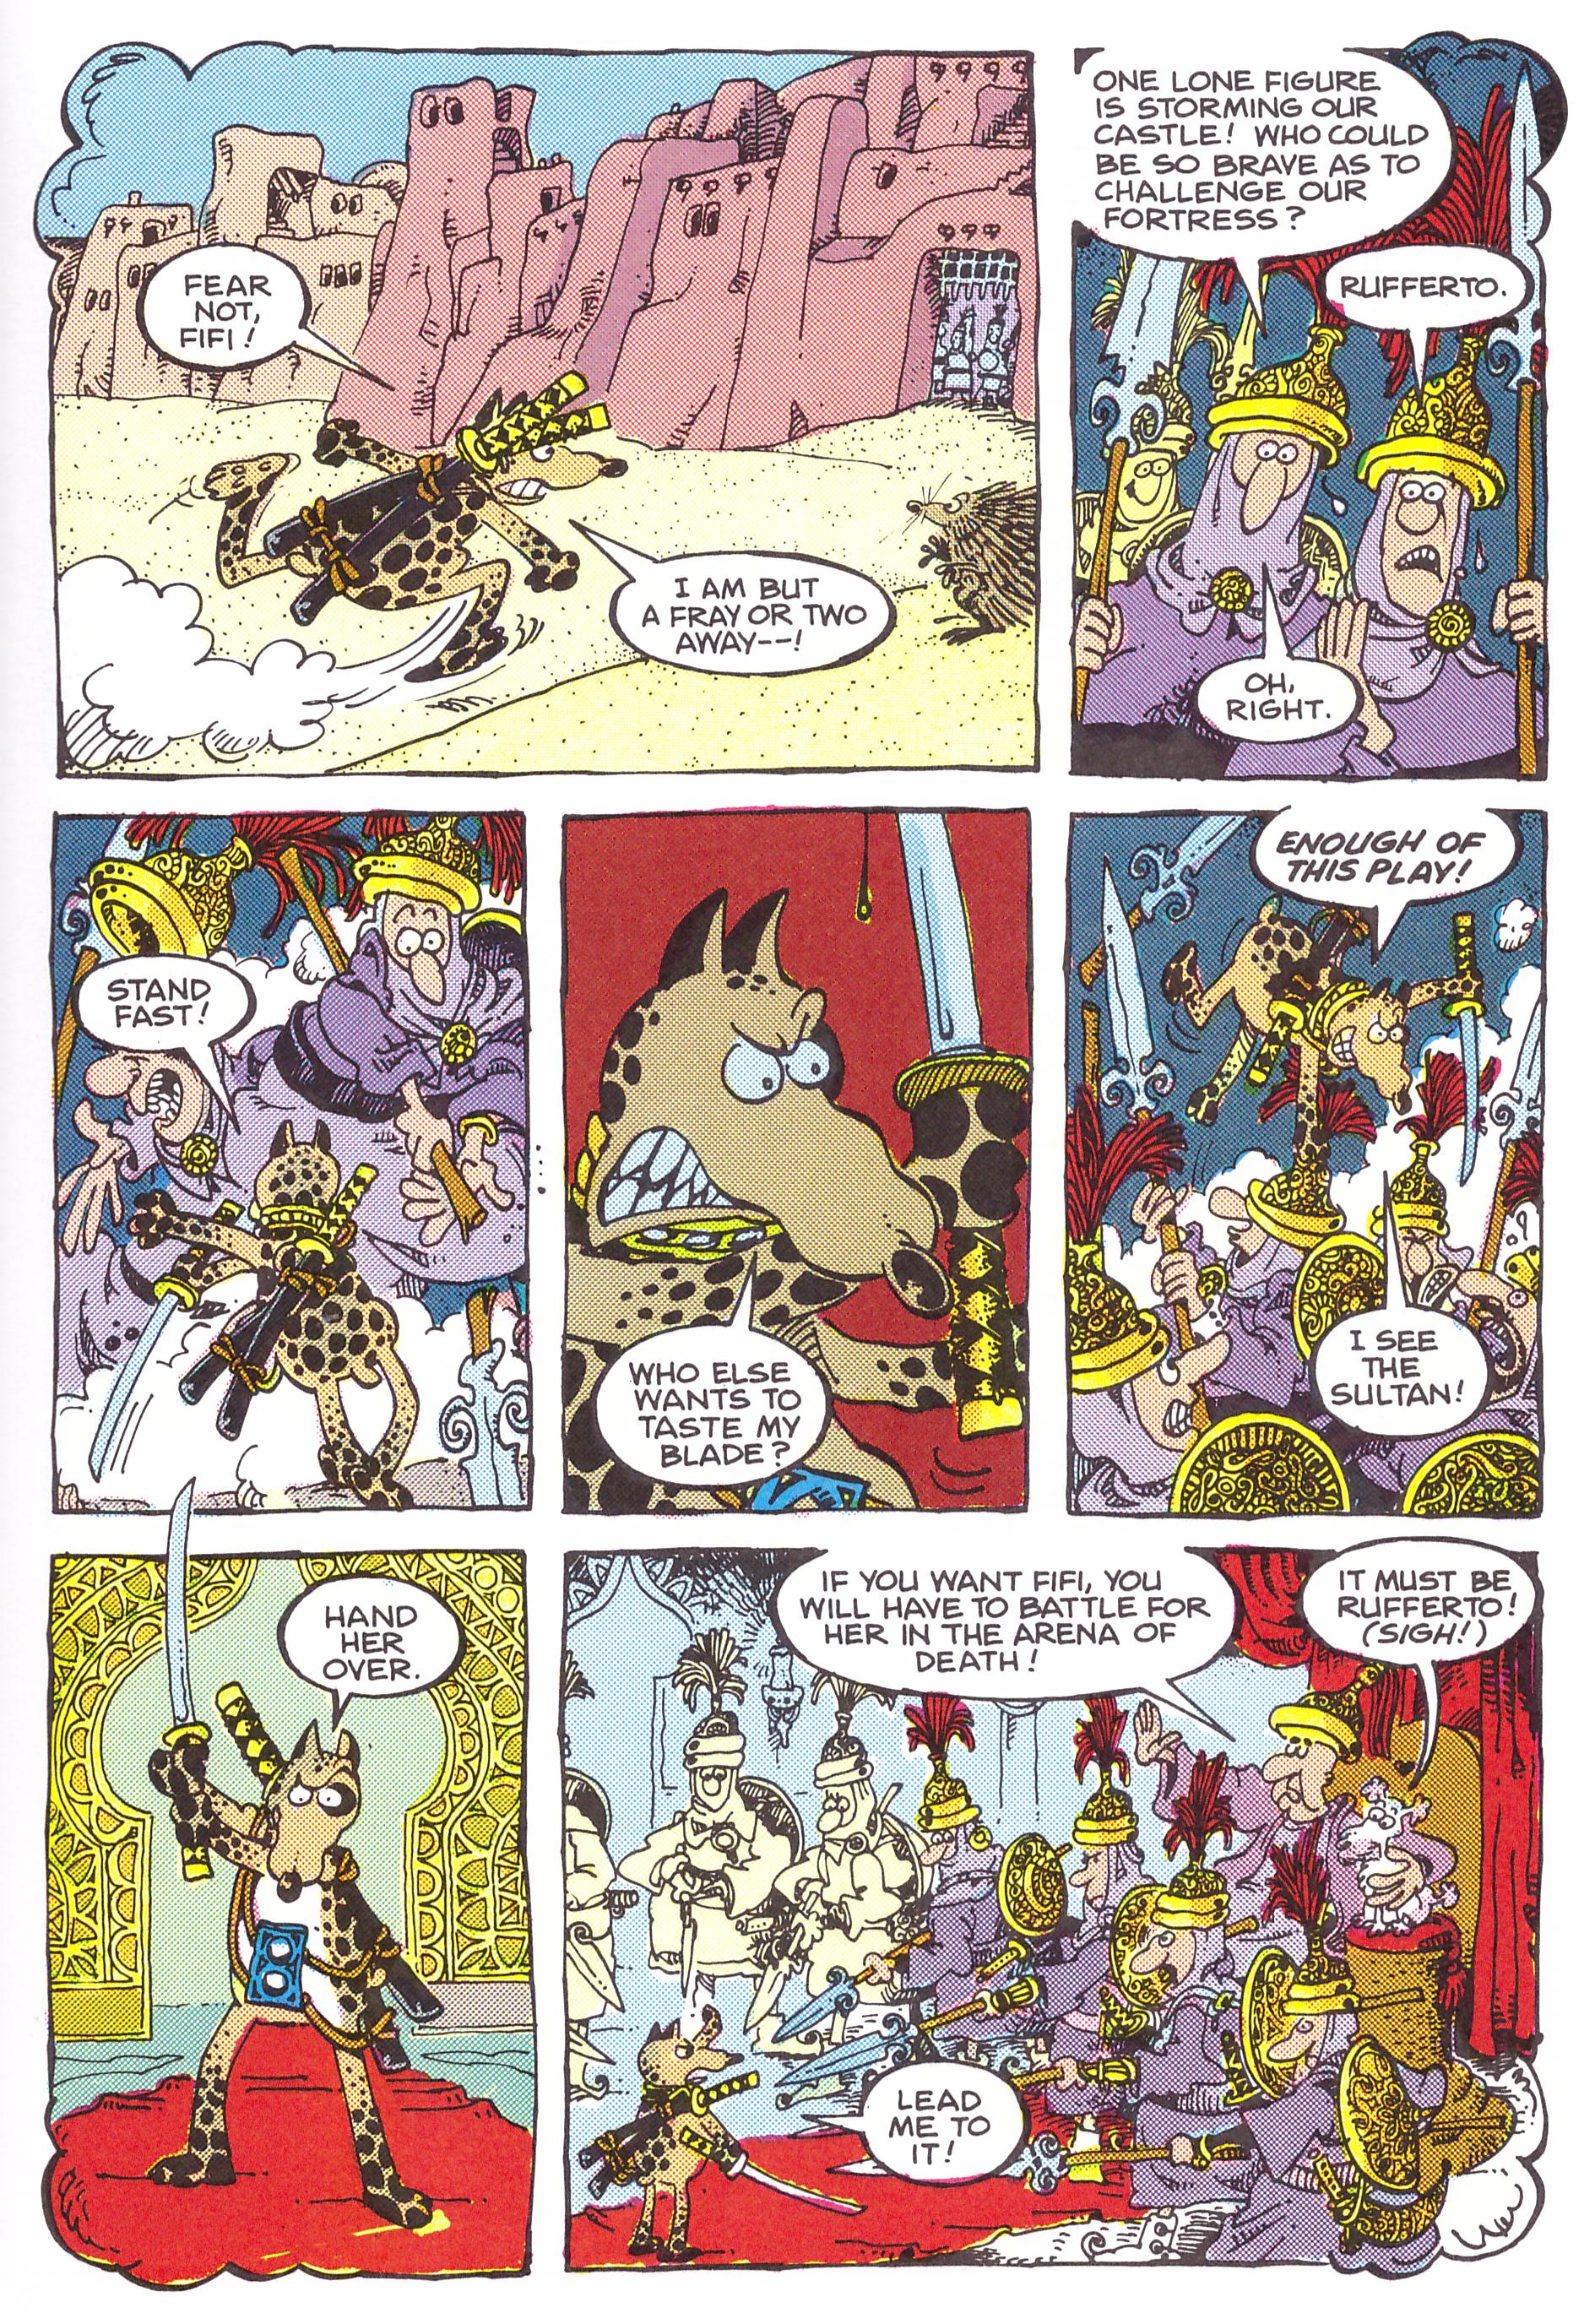 The Groo Library review